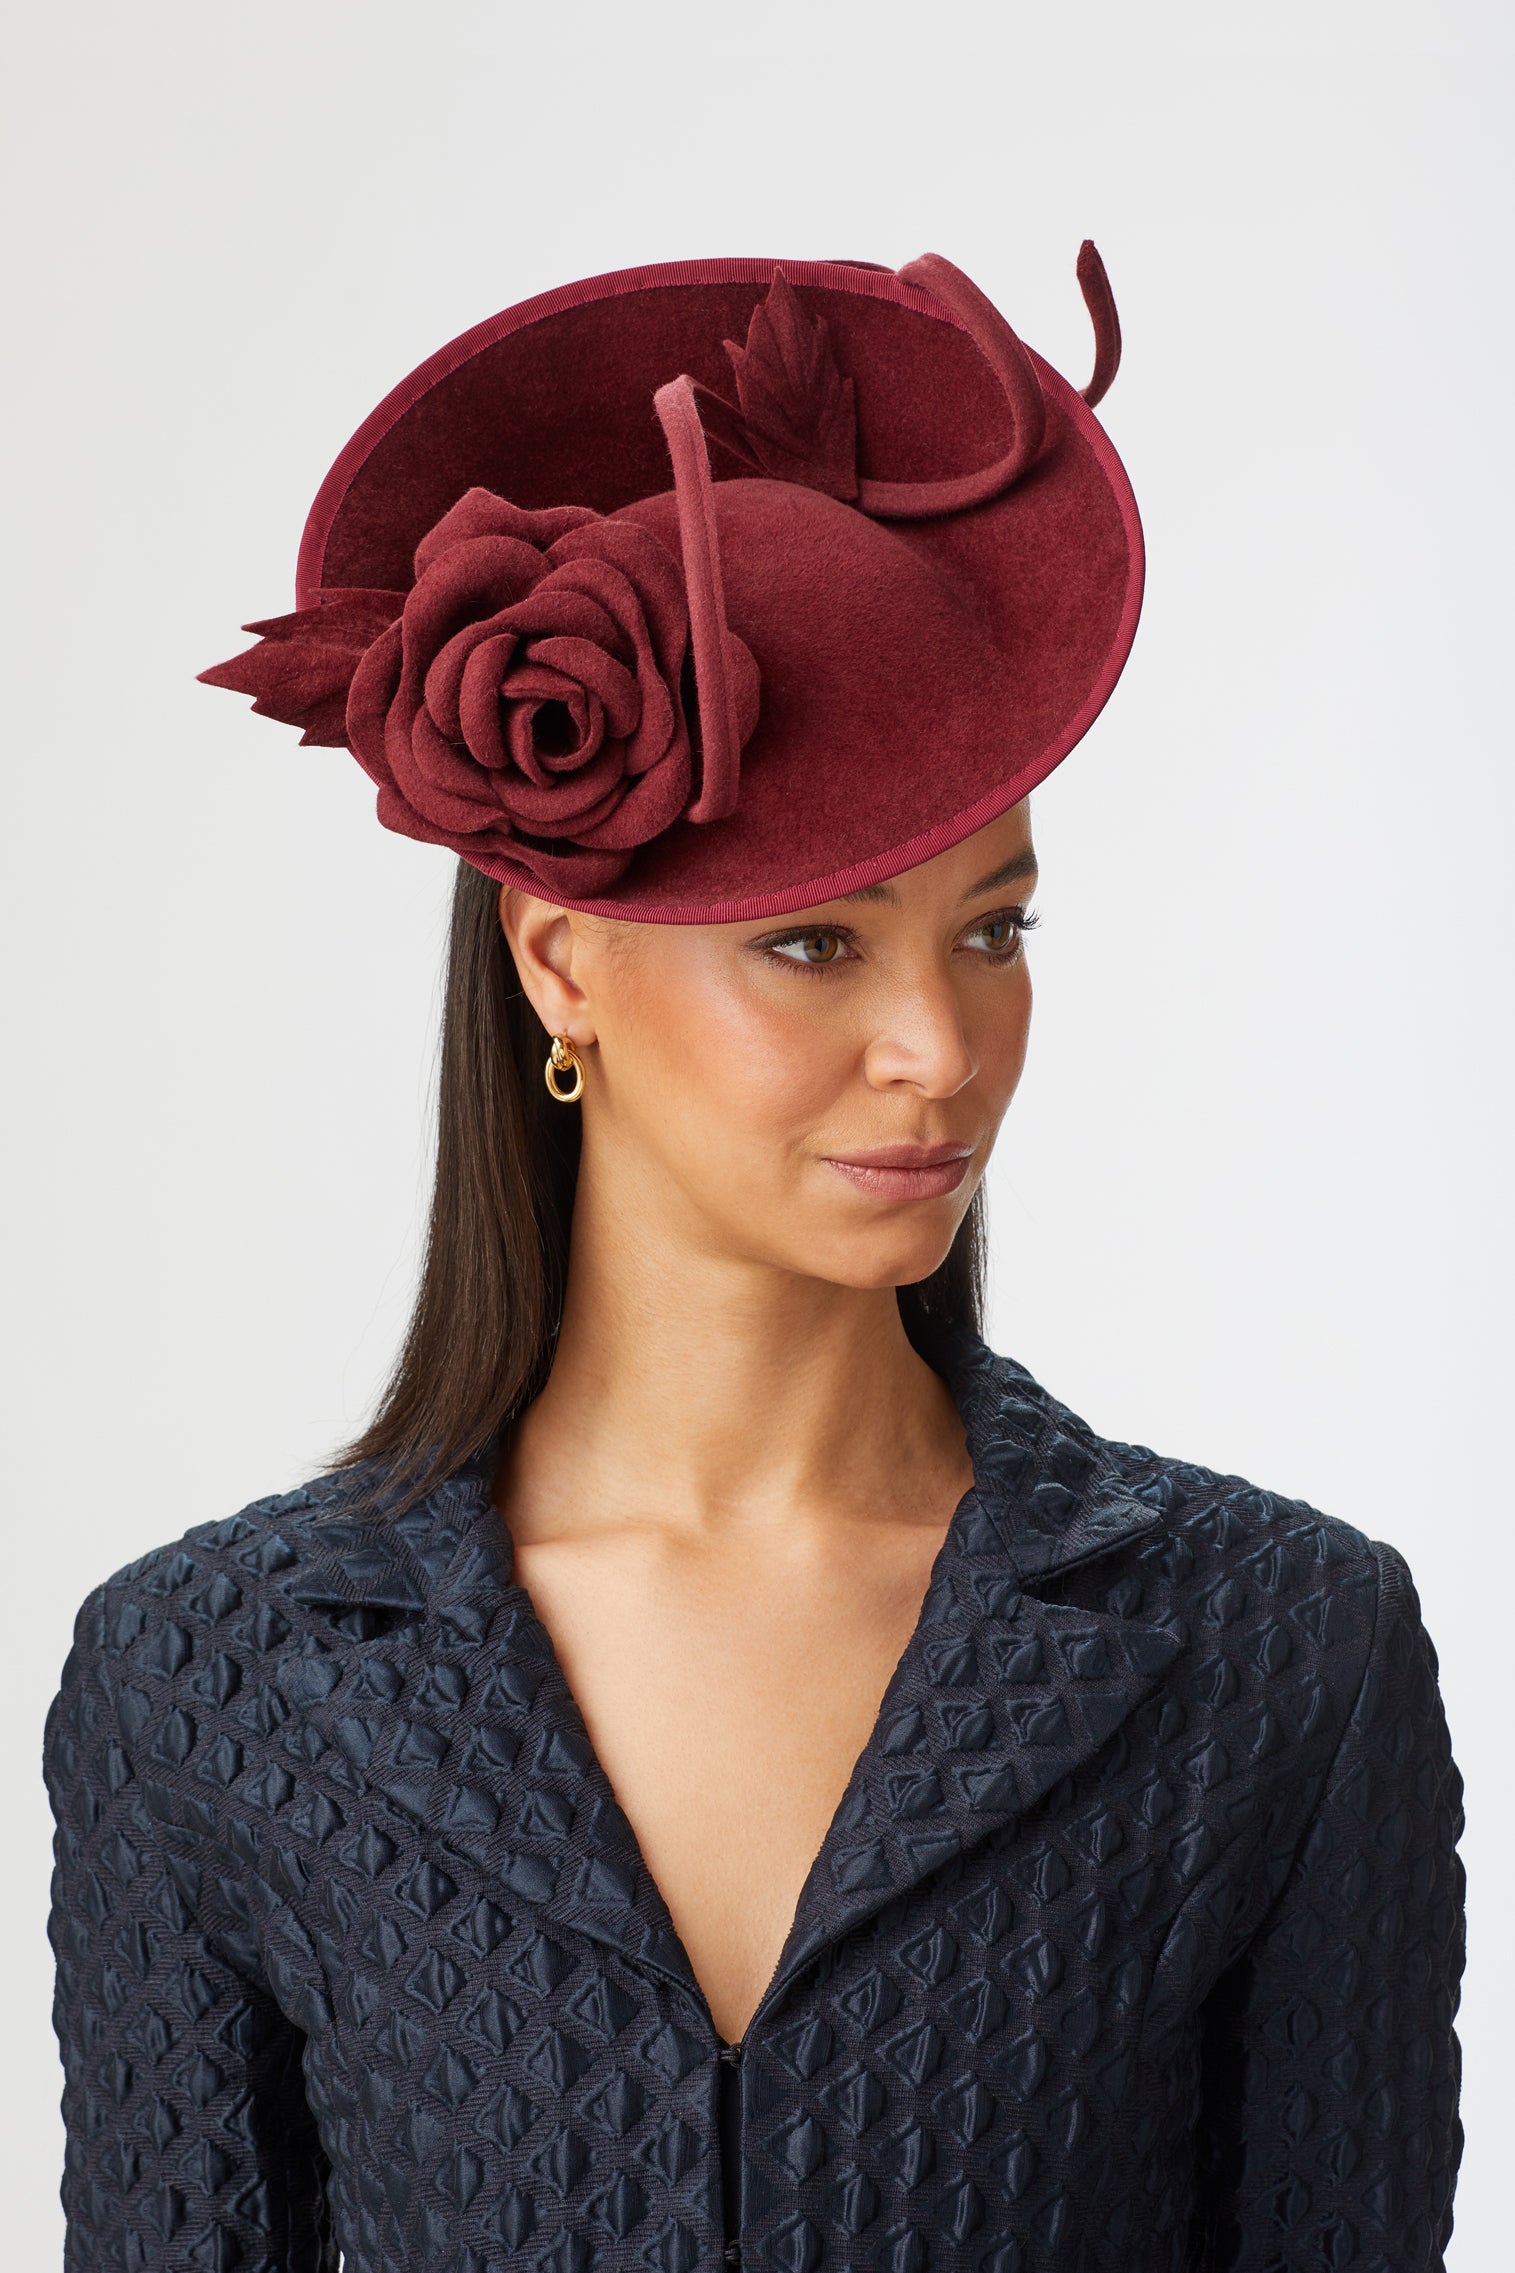 Belgravia Rose Hat - Lock Couture by Awon Golding - Lock & Co. Hatters London UK